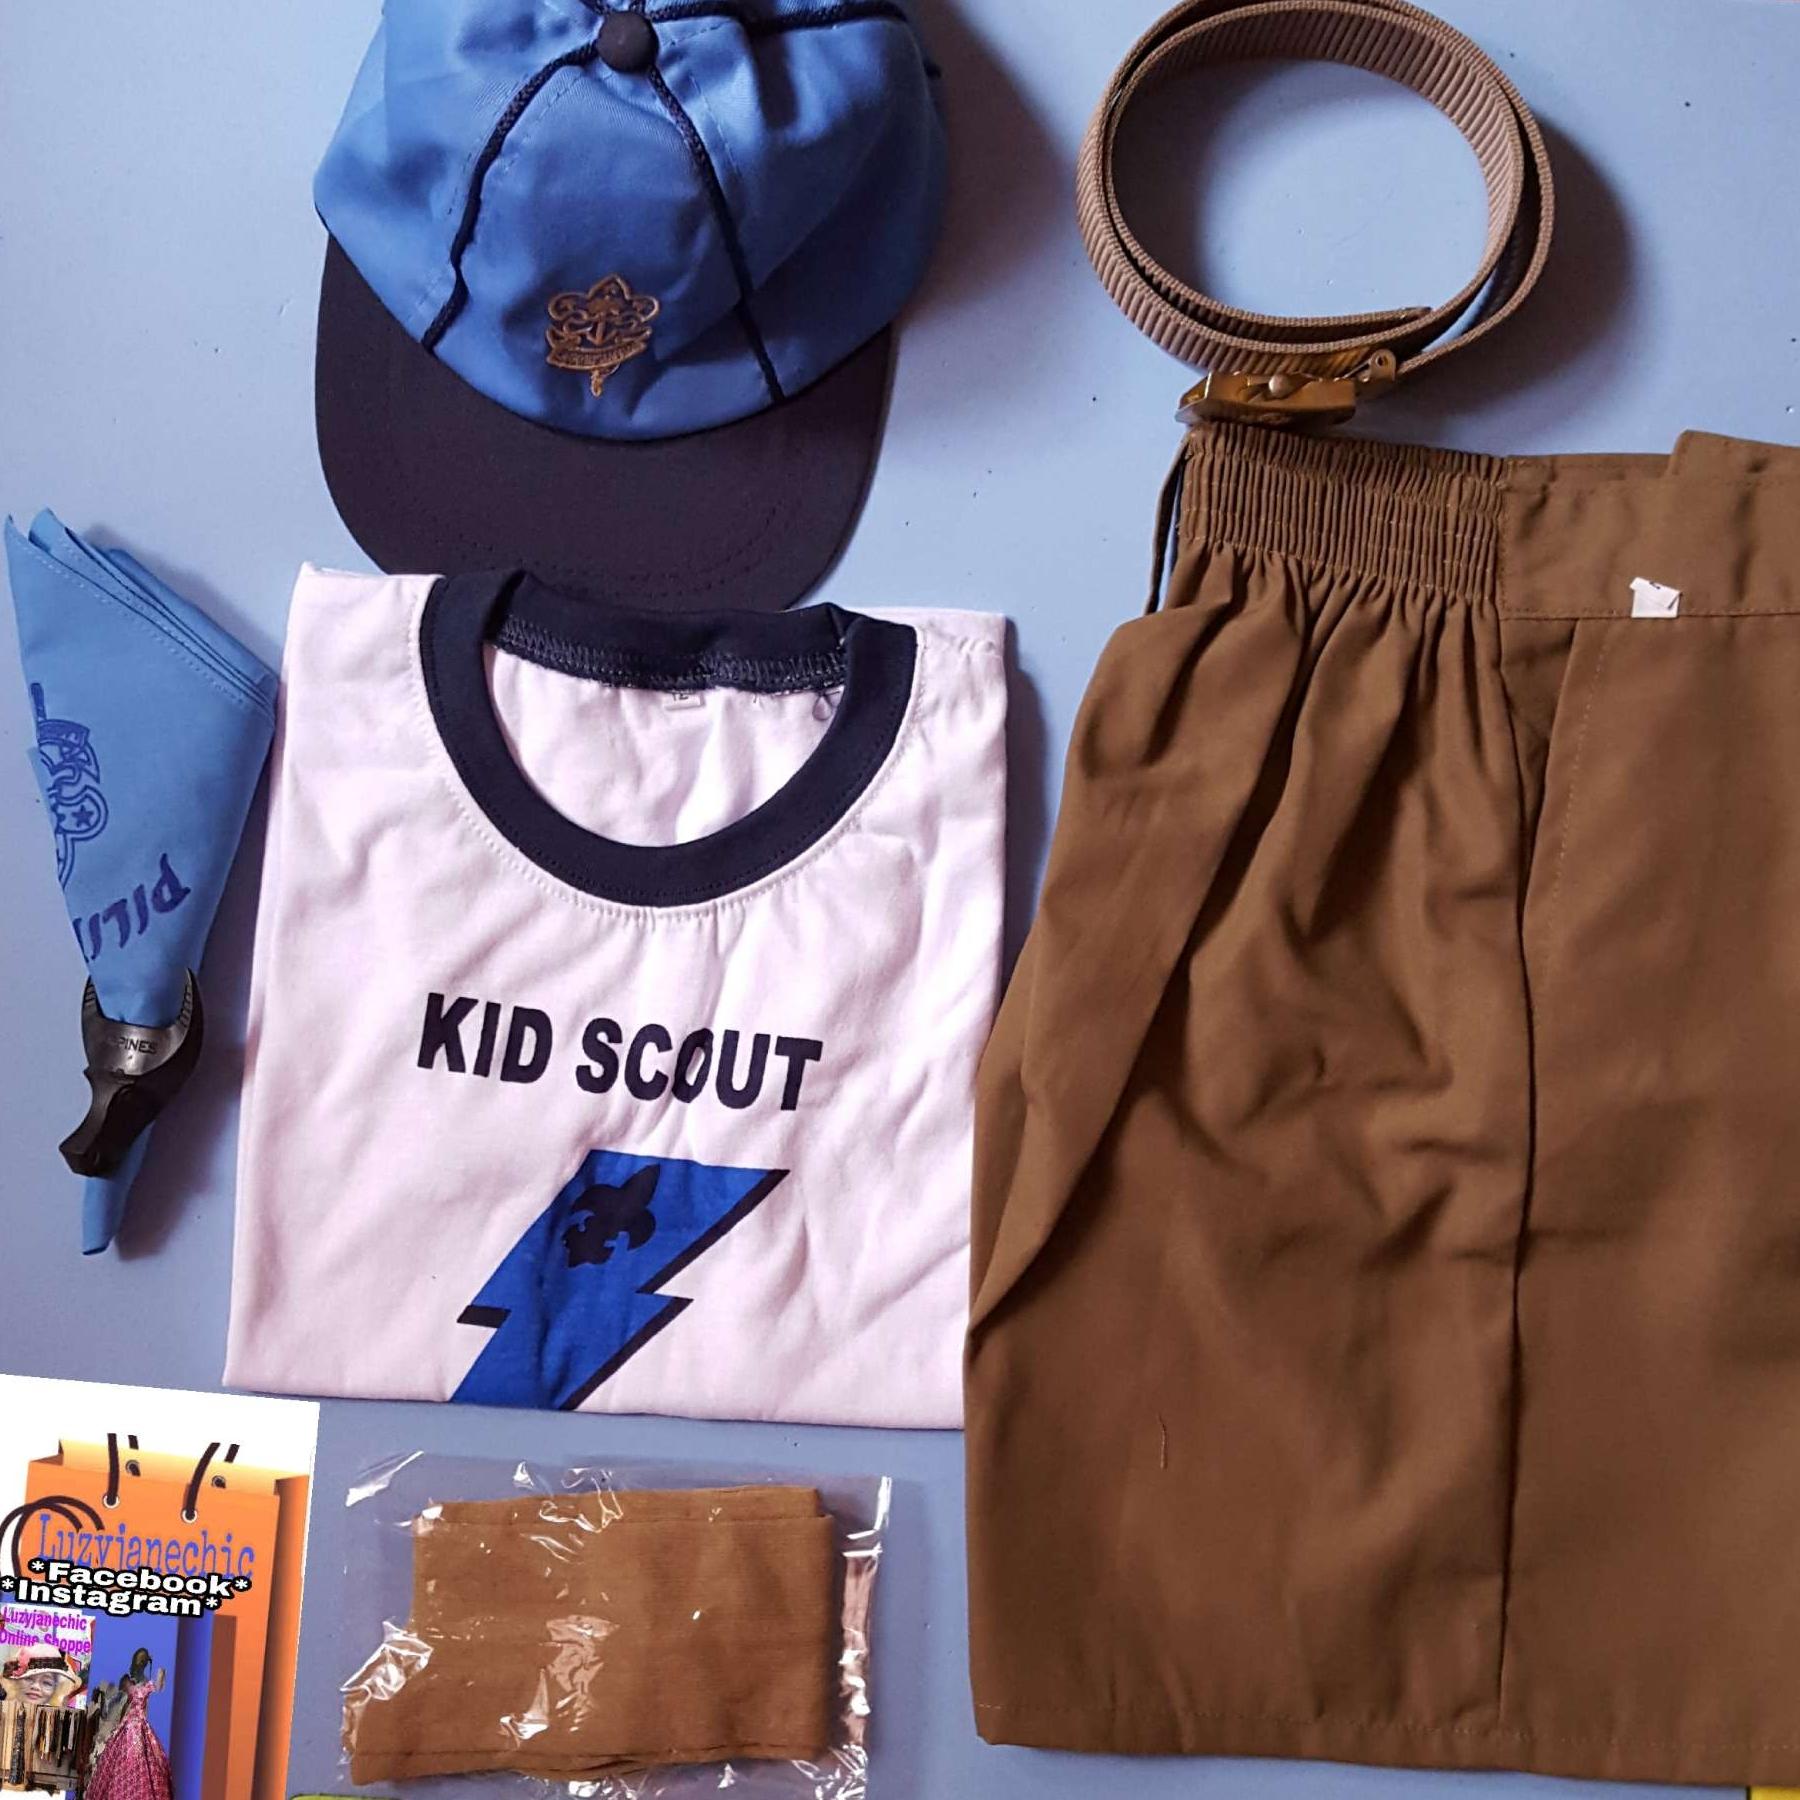 bsp-kids-scout-uniform-for-school-boy-from-4-up-to-7-years-old-or-best